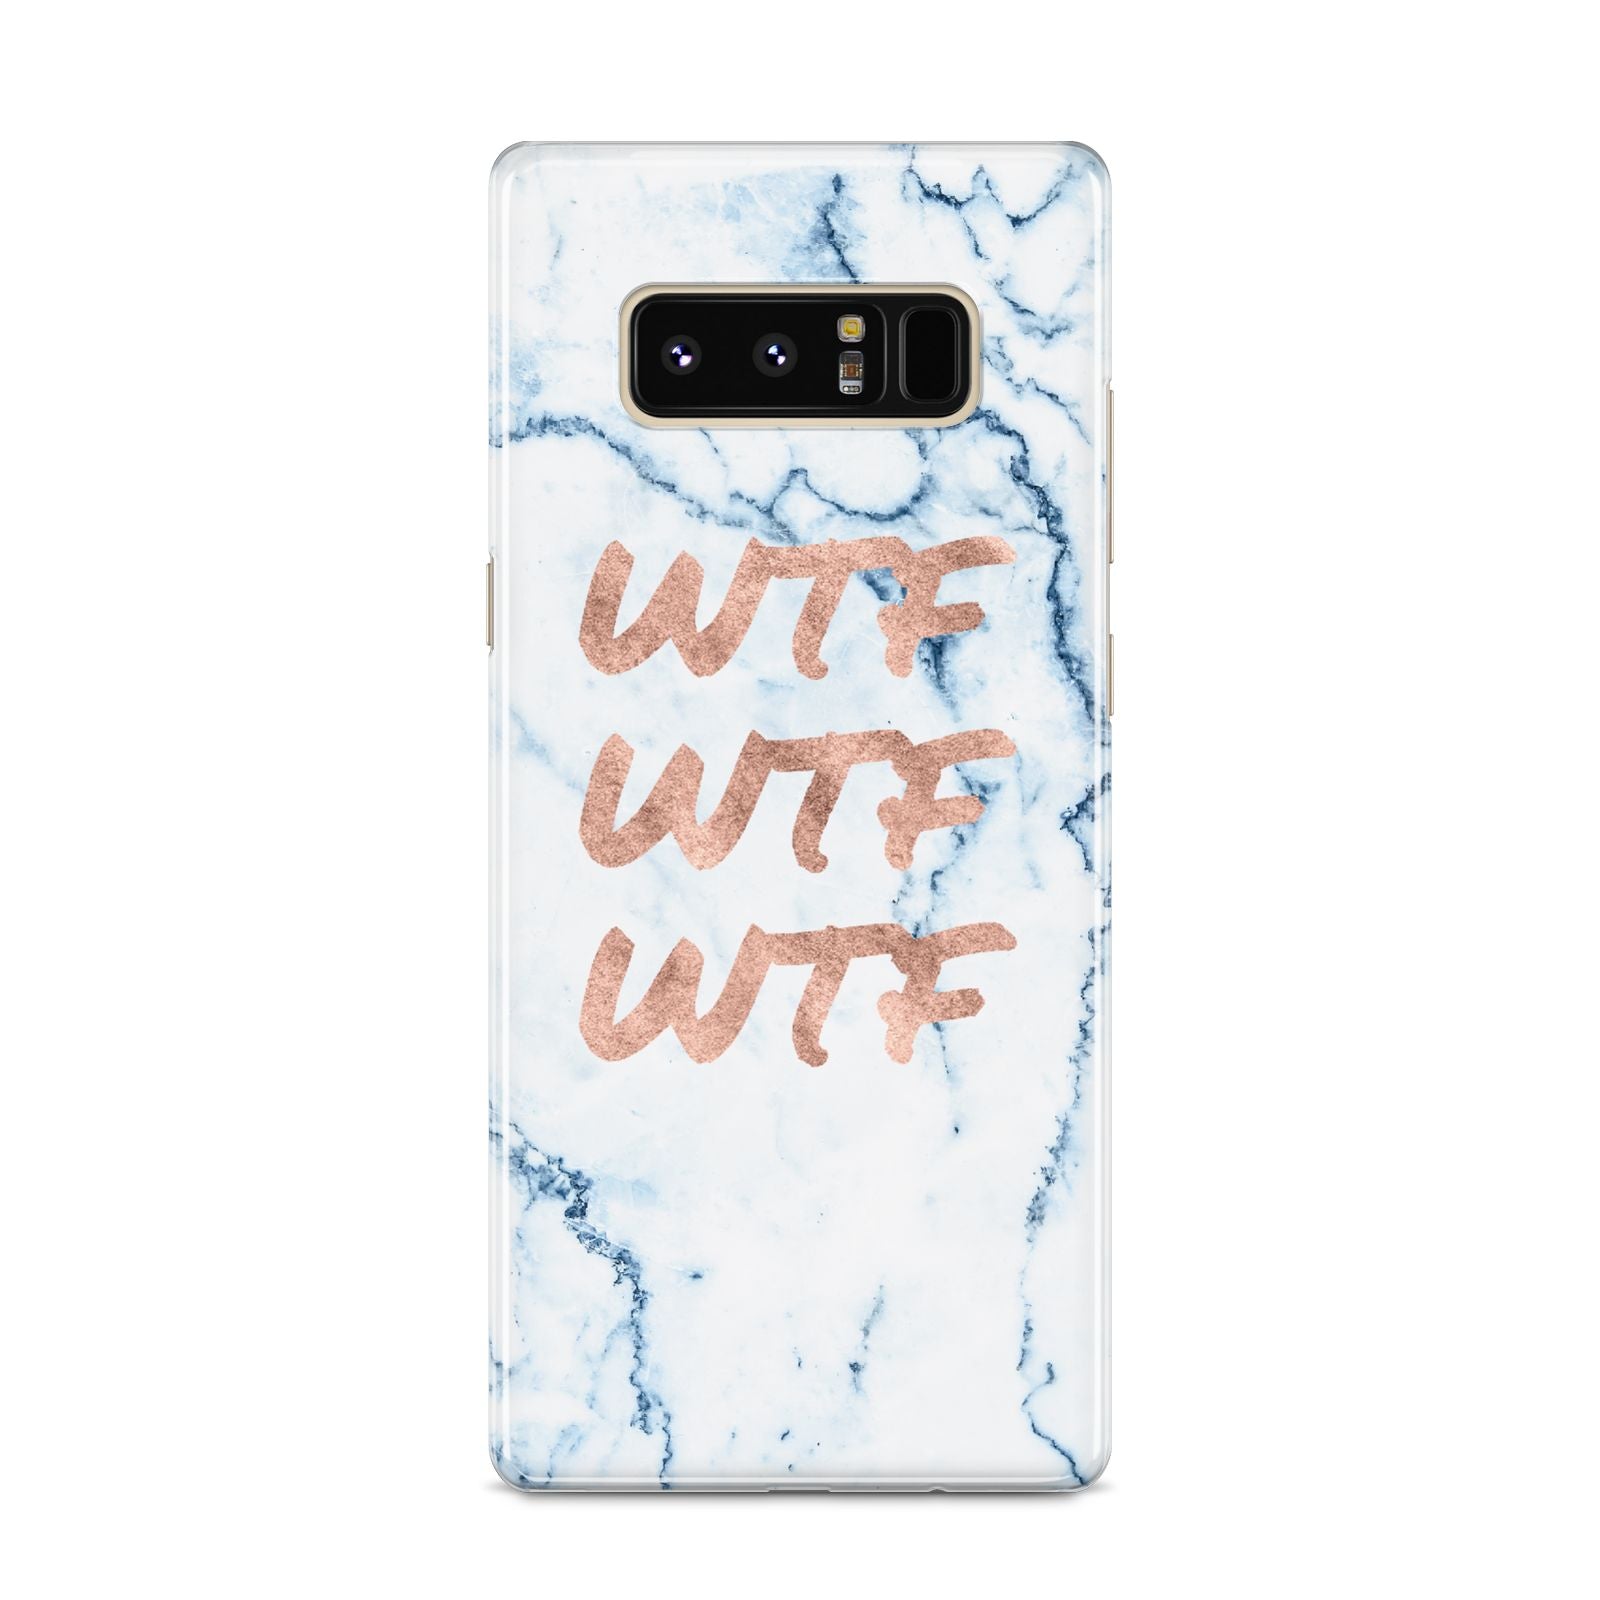 Wtf Rose Gold Blue Marble Effect Samsung Galaxy S8 Case